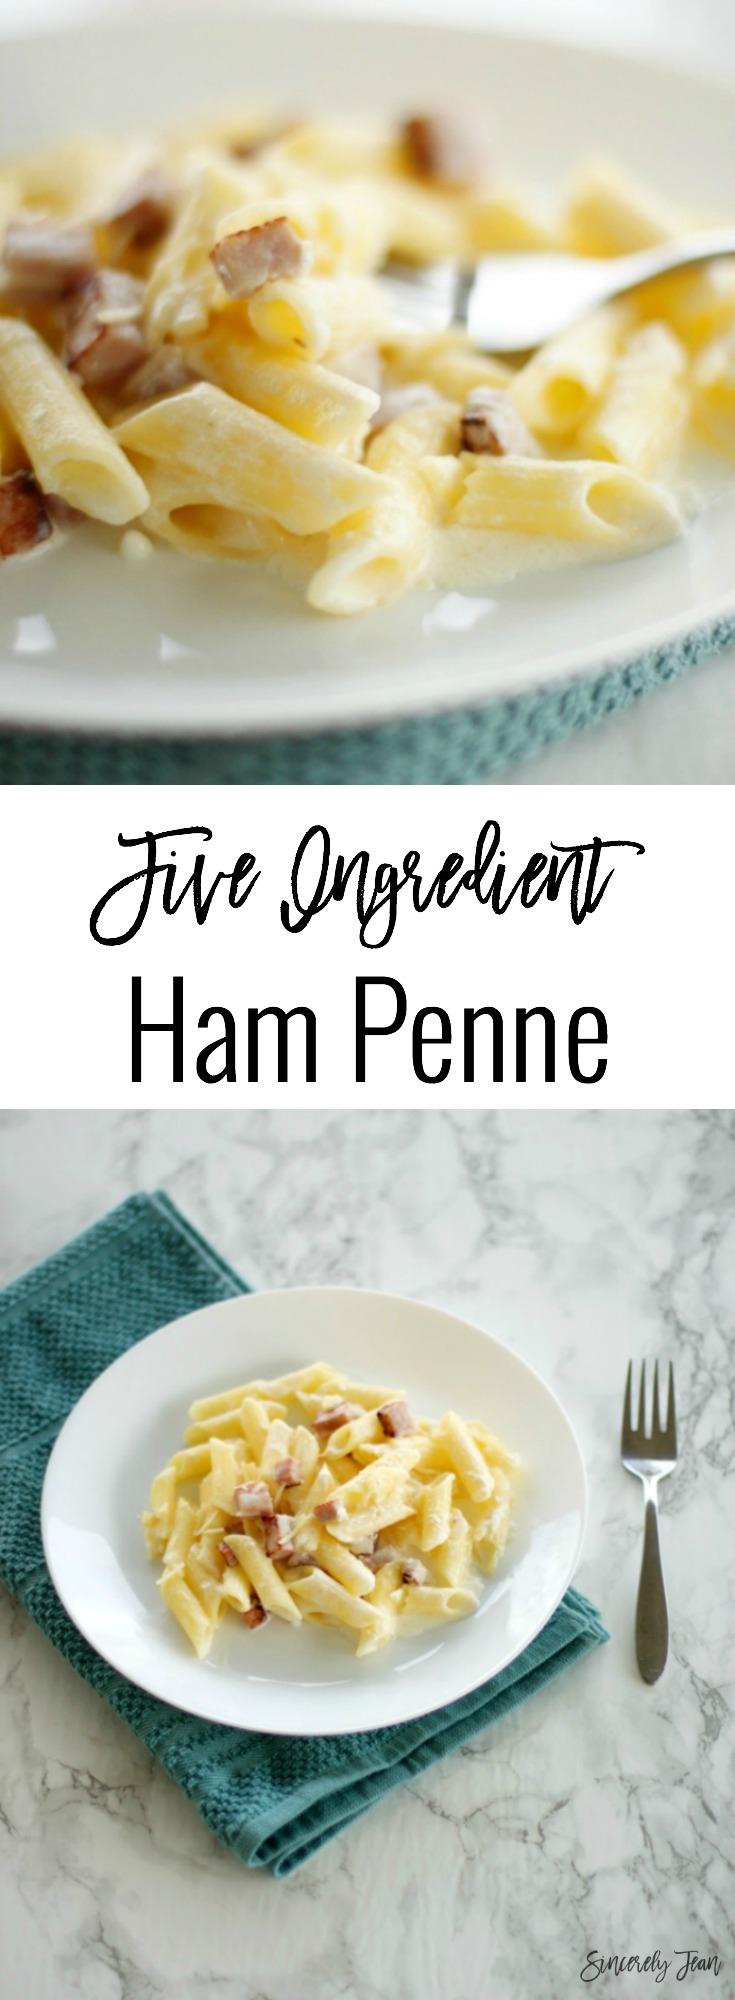 Simple dinner recipes by SincerelyJean.com - Ham Penne Pasta, perfect for Easter leftover ham